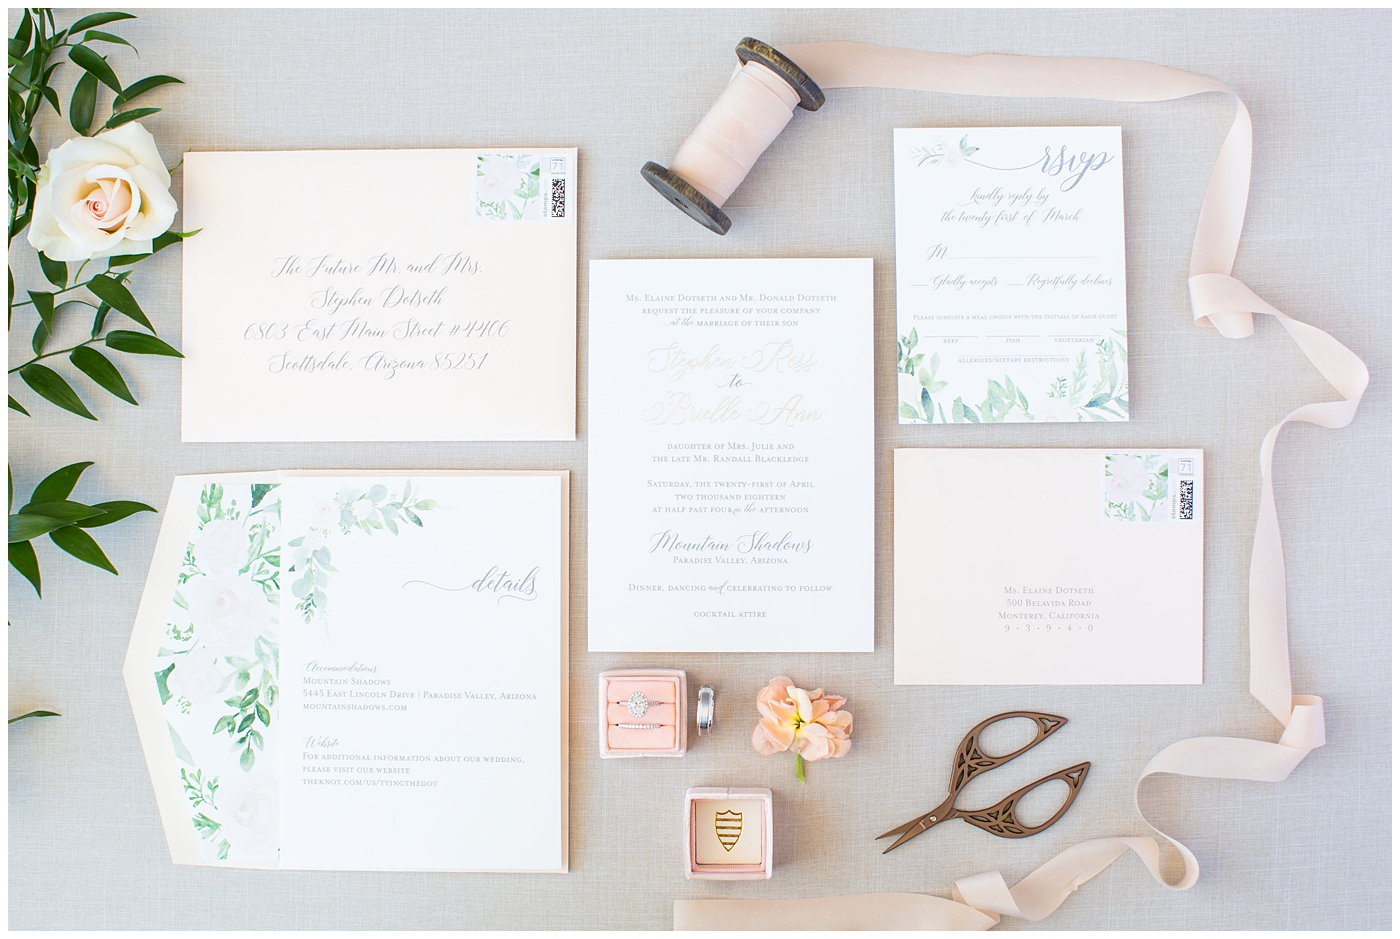 blush pink invitation with soft green watercolor suite detail flat lay with ribbon and rings wedding details